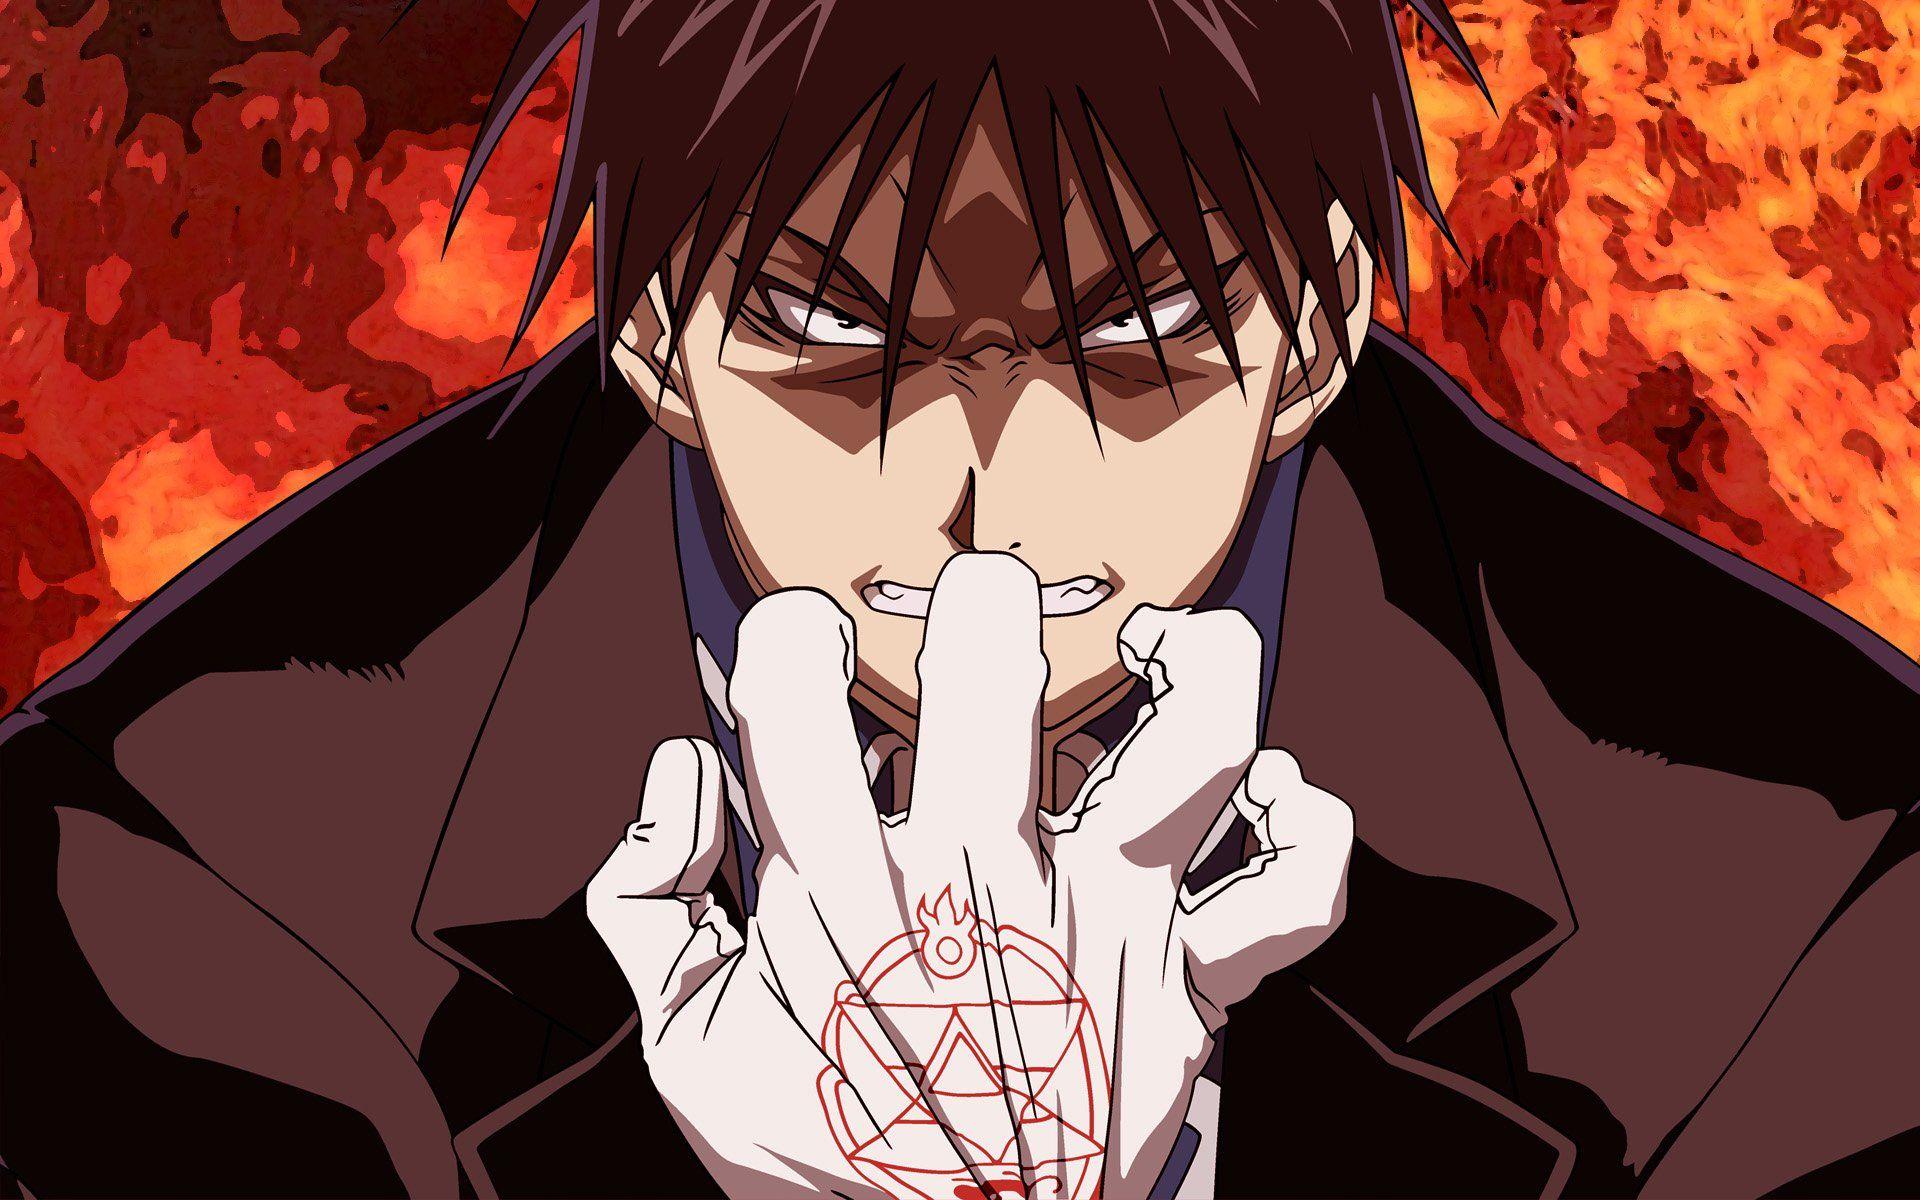 Roy Mustang Hd Wallpapers Top Free Roy Mustang Hd Backgrounds Wallpaperaccess